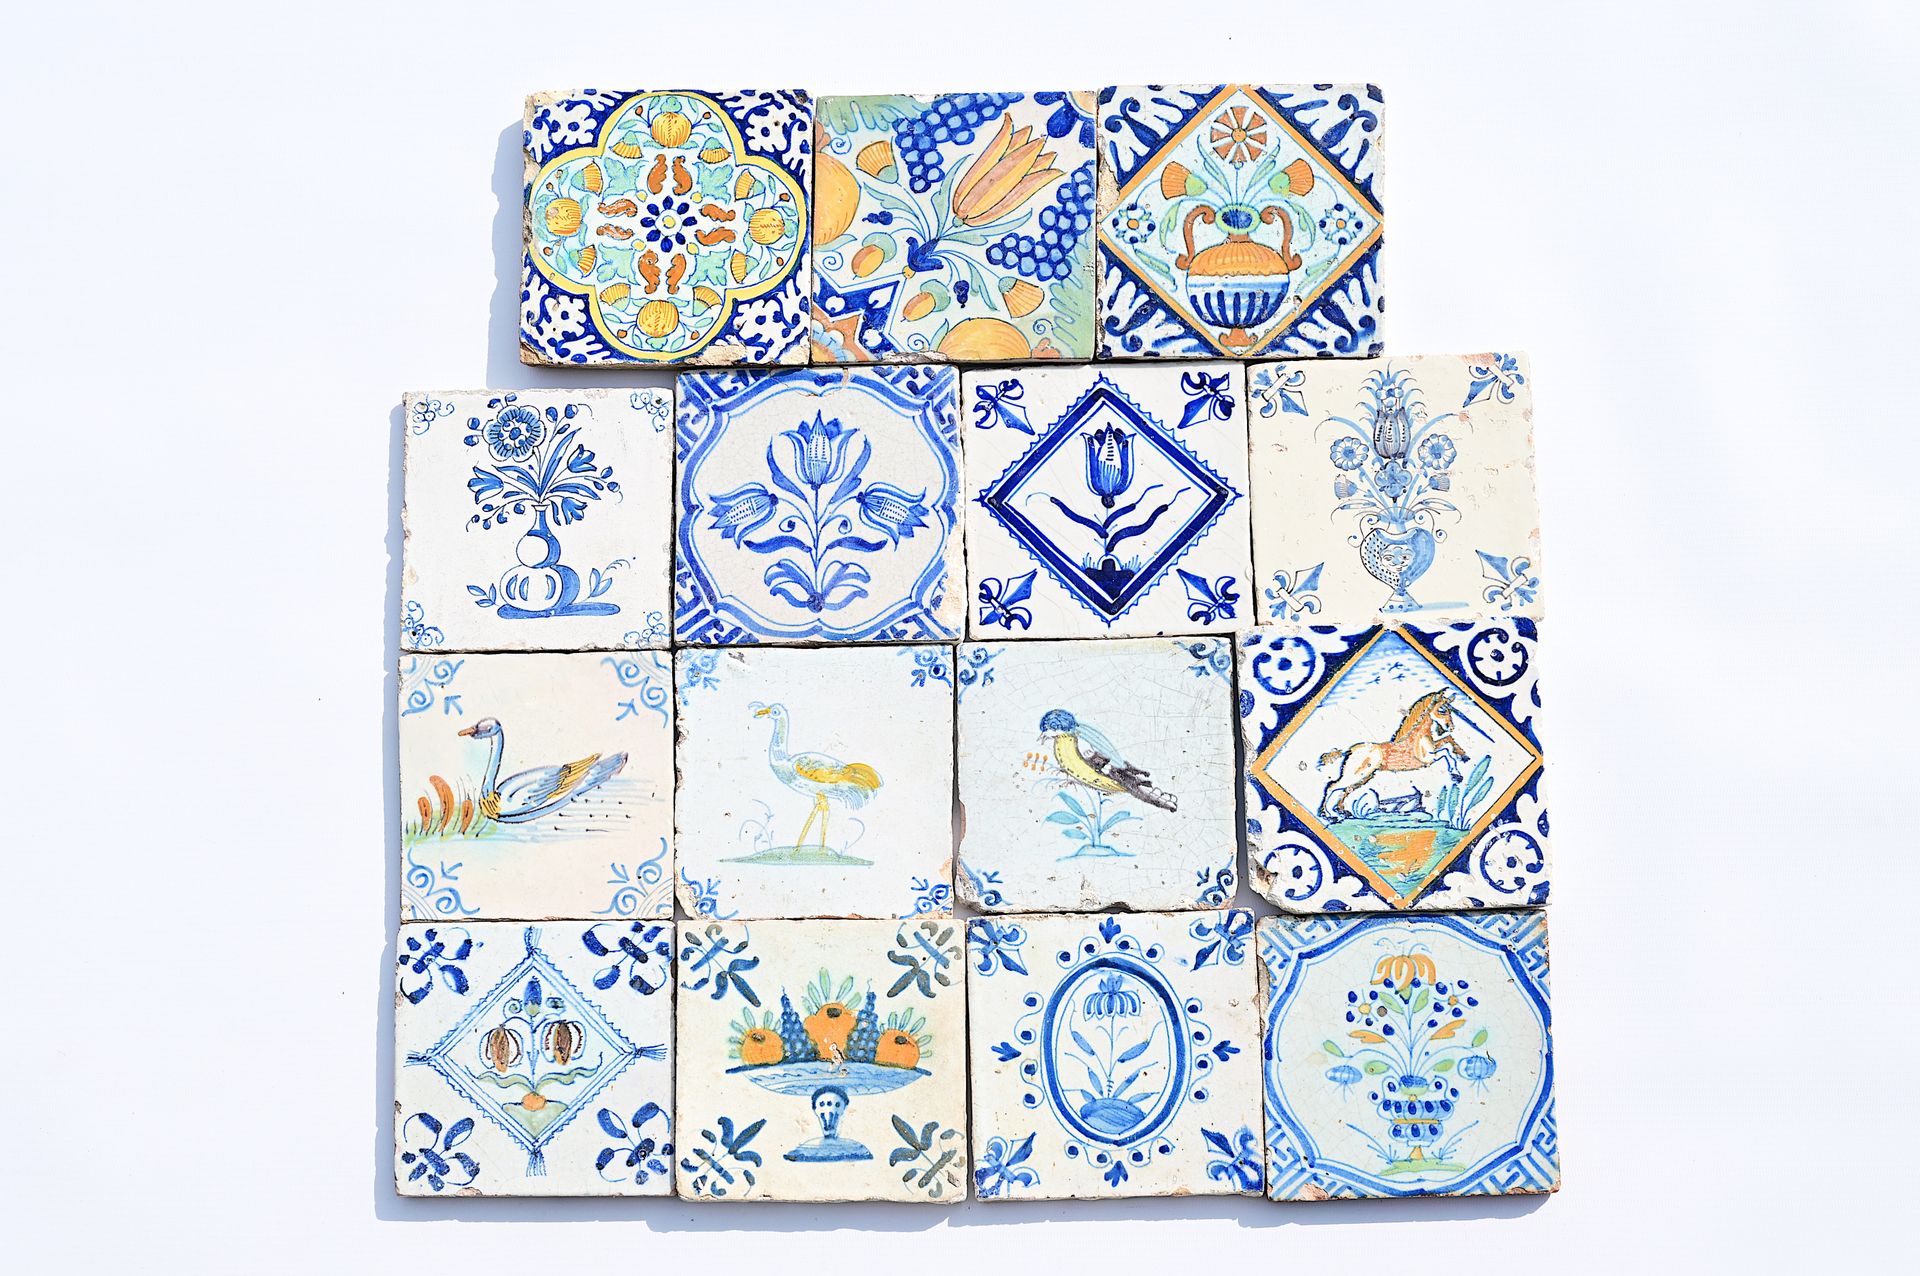 Seventeen blue and white and polychrome Dutch Delft tiles, 17th C. Seventeen blu&hellip;